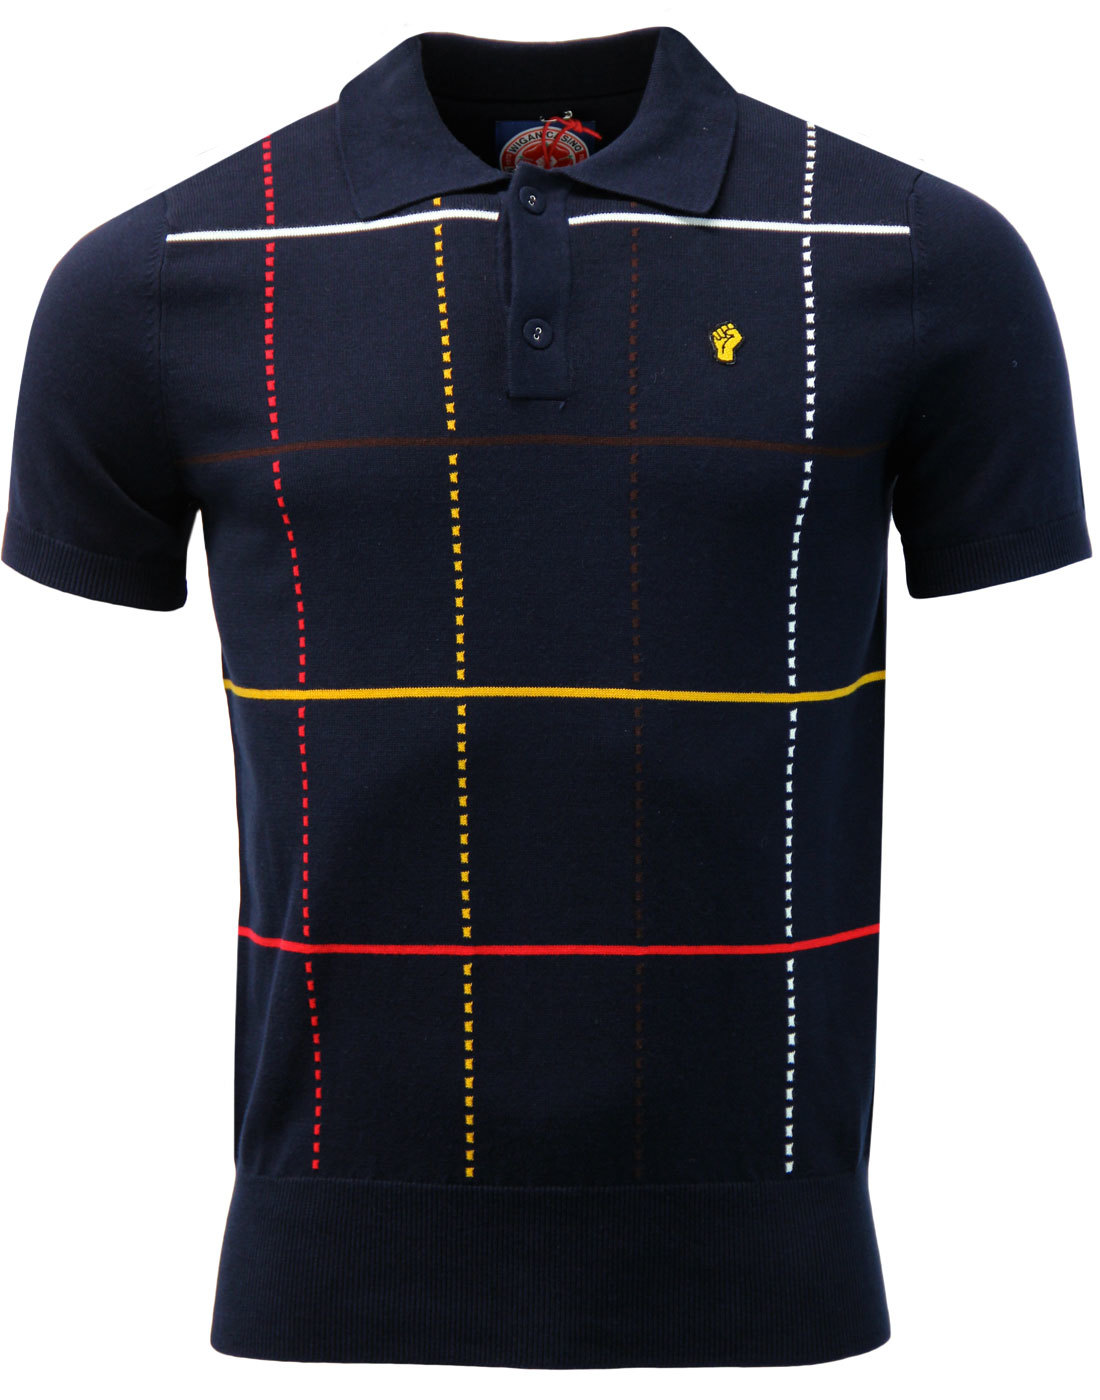 WIGAN CASINO Northern Soul Check Knit Polo Top (N)